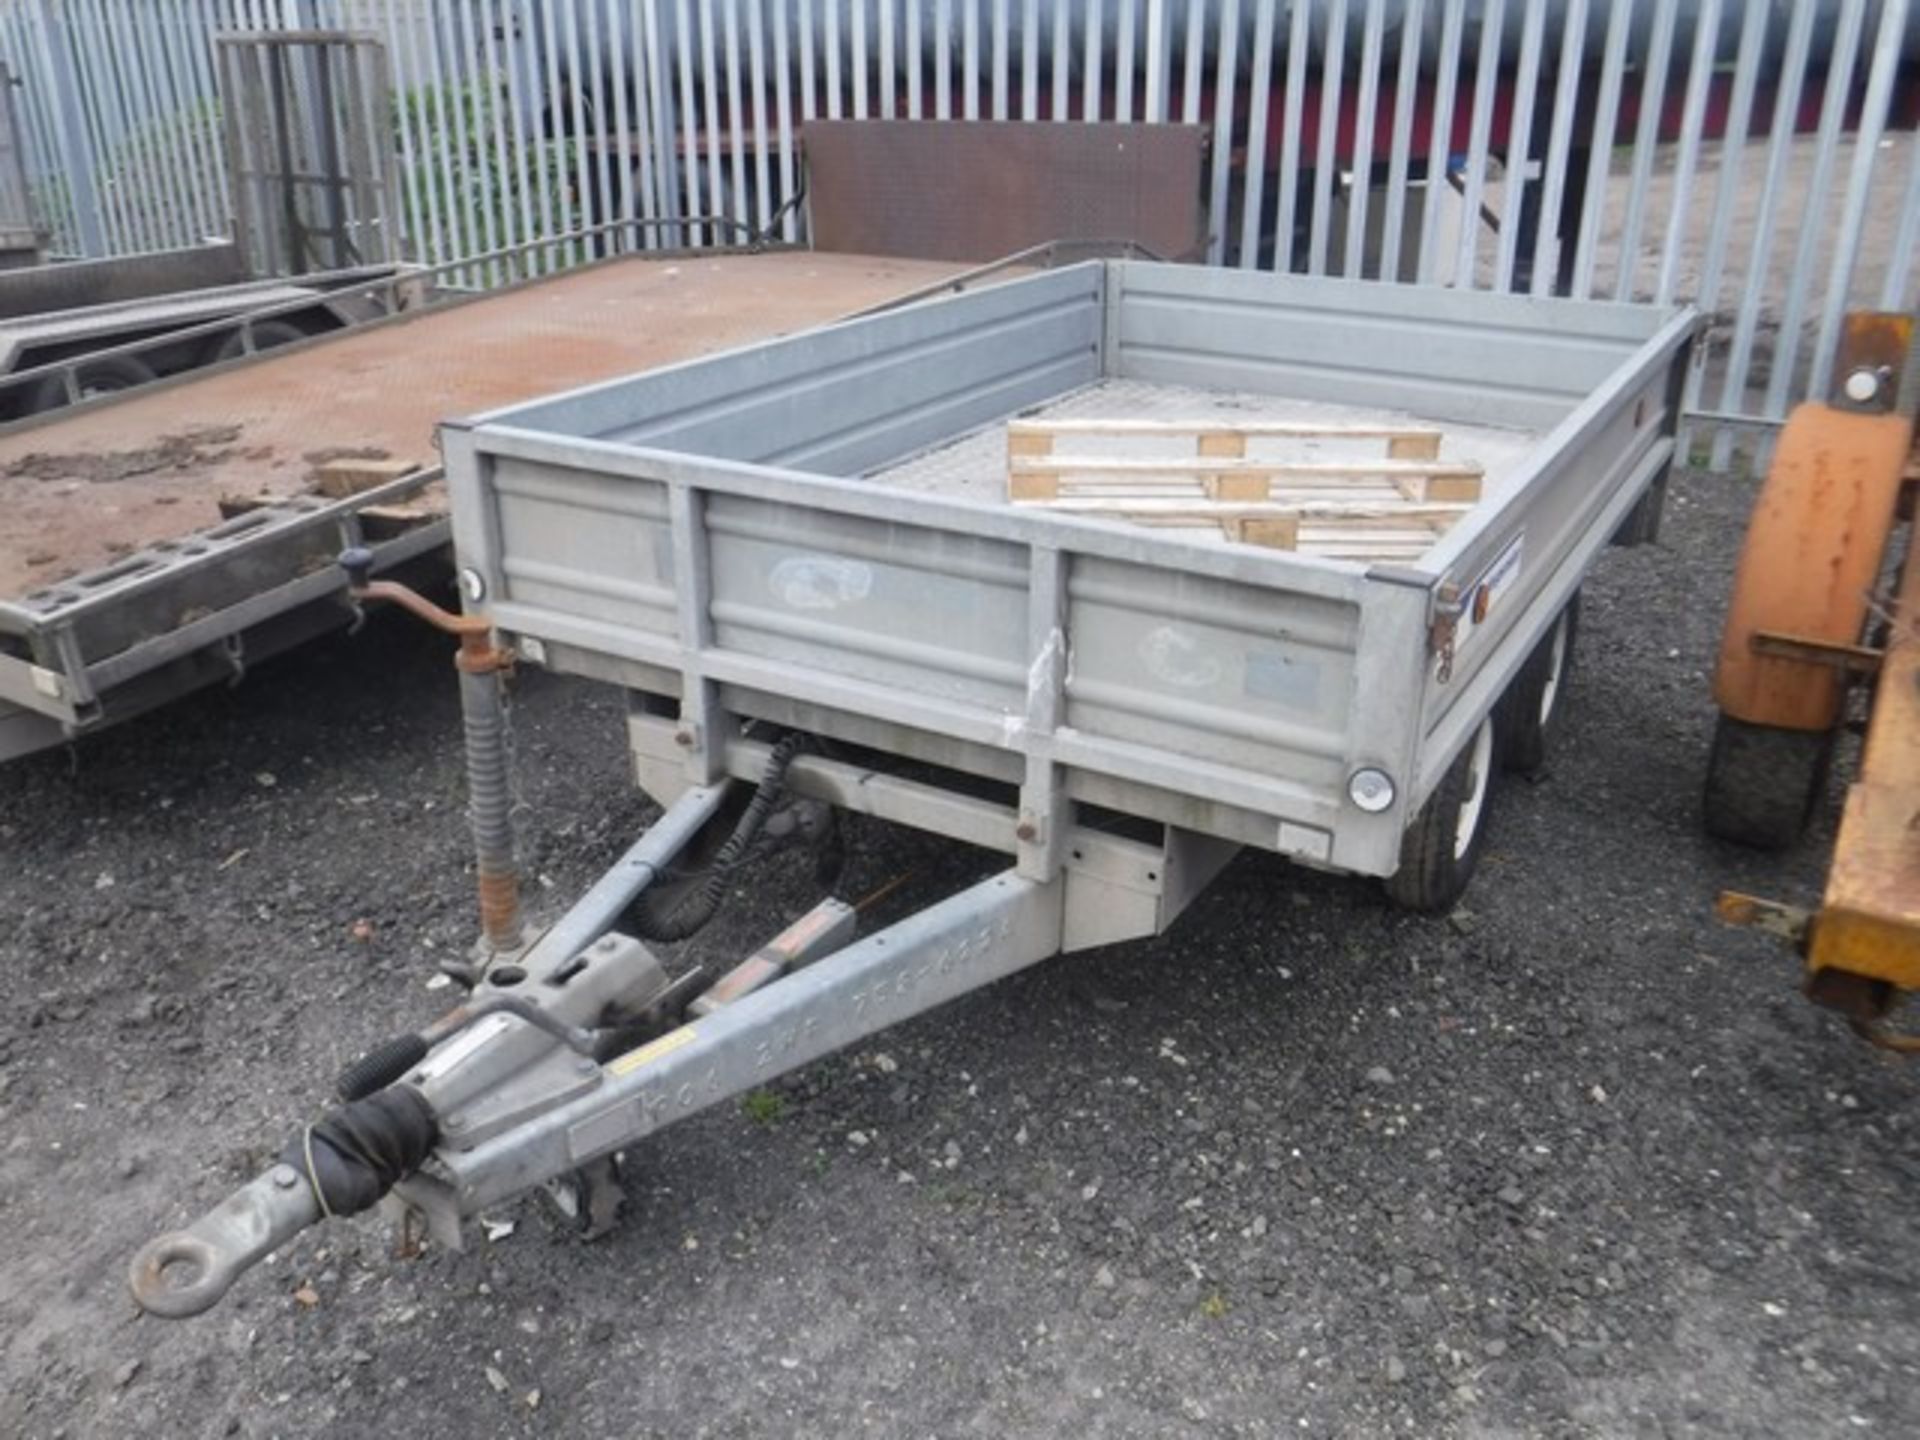 INDESPENSION 8' x 5' twin axle dropside trailer. s/n SDH3200856079332. Asset no. 758-6224,